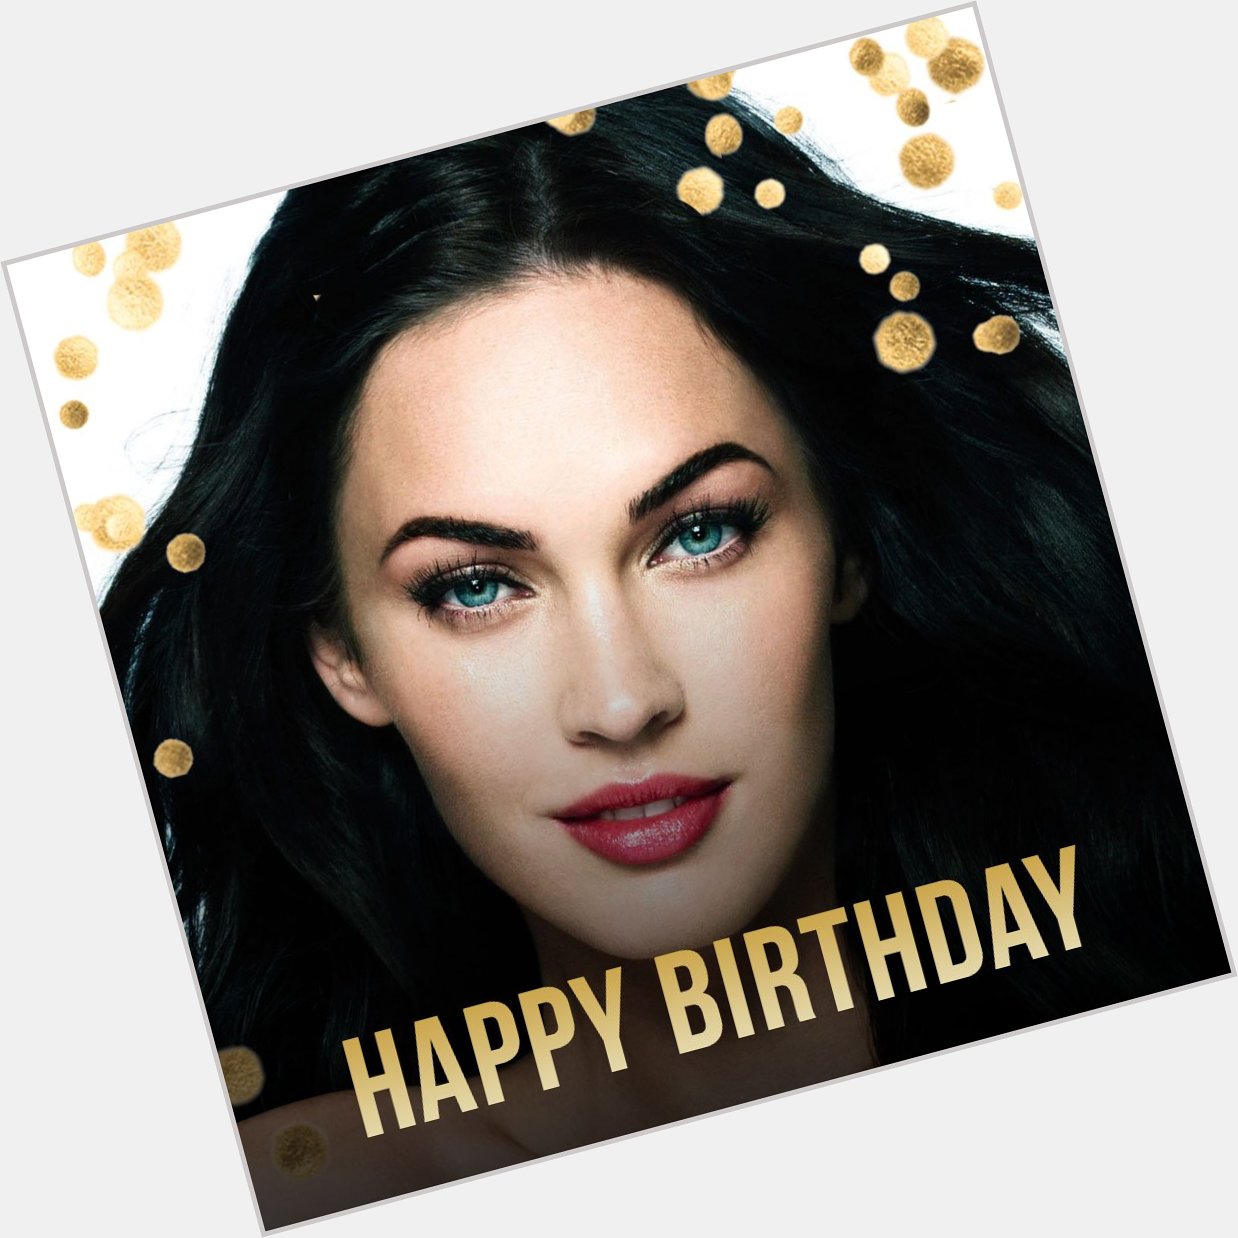 Happy Birthday Megan Fox, you are more stunning than ever! 